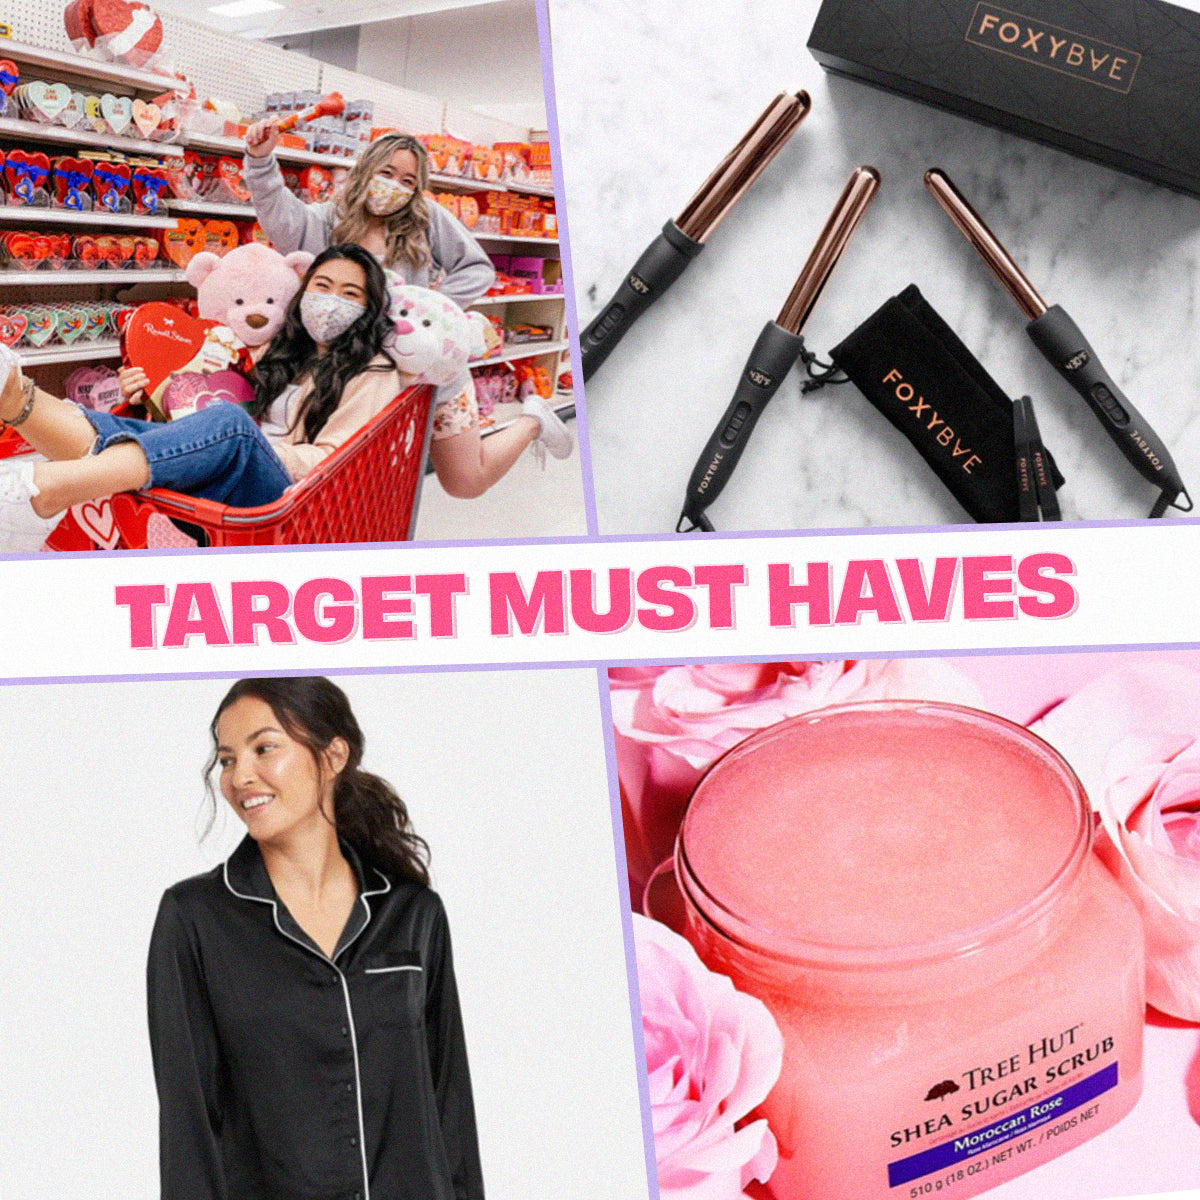 Target Must Haves image